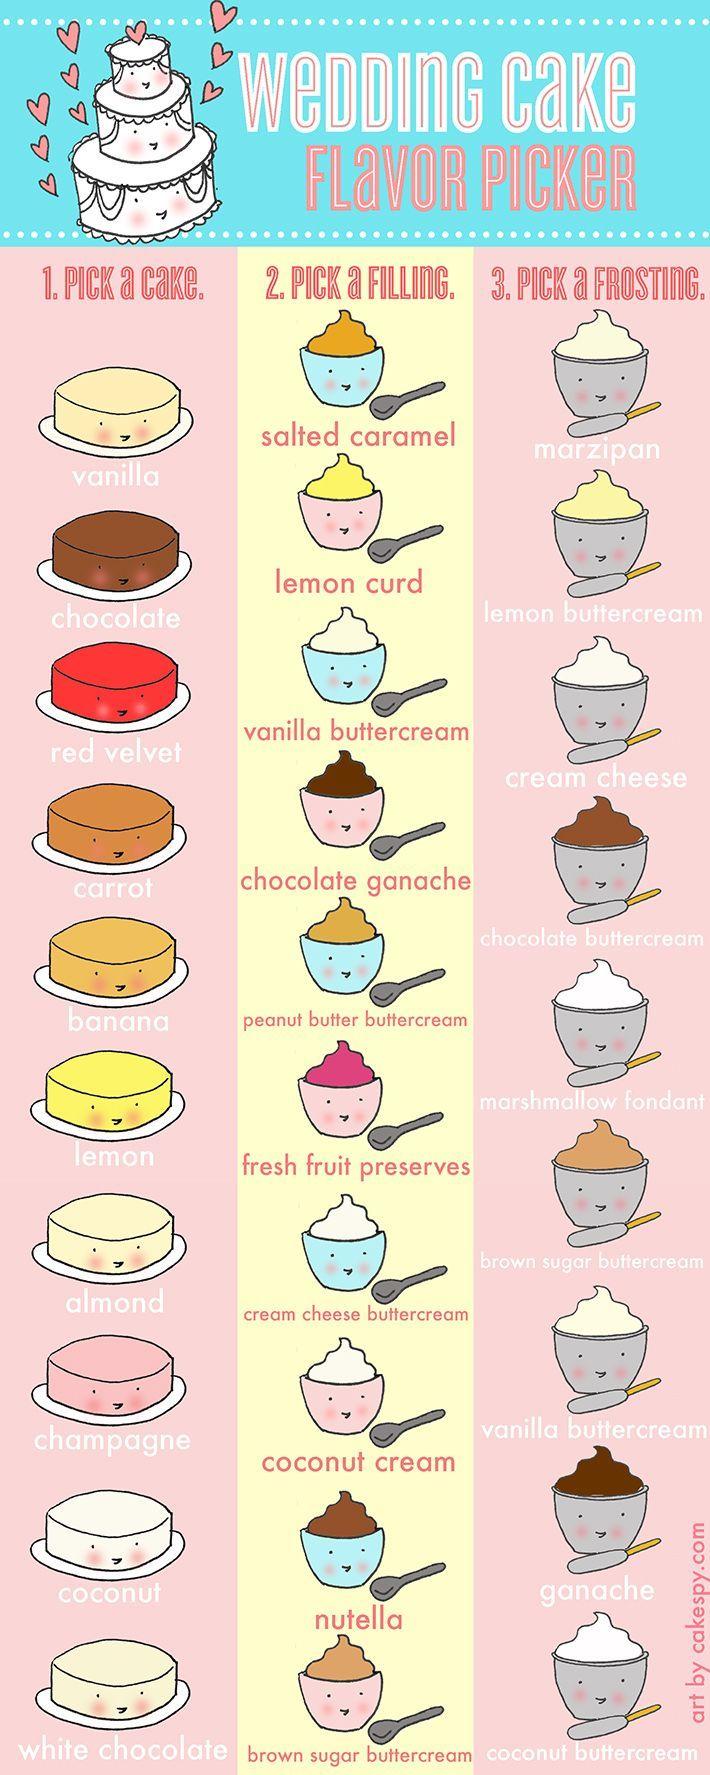 Mariage - A Fun Wedding Cake Flavors Infographic - On Craftsy!